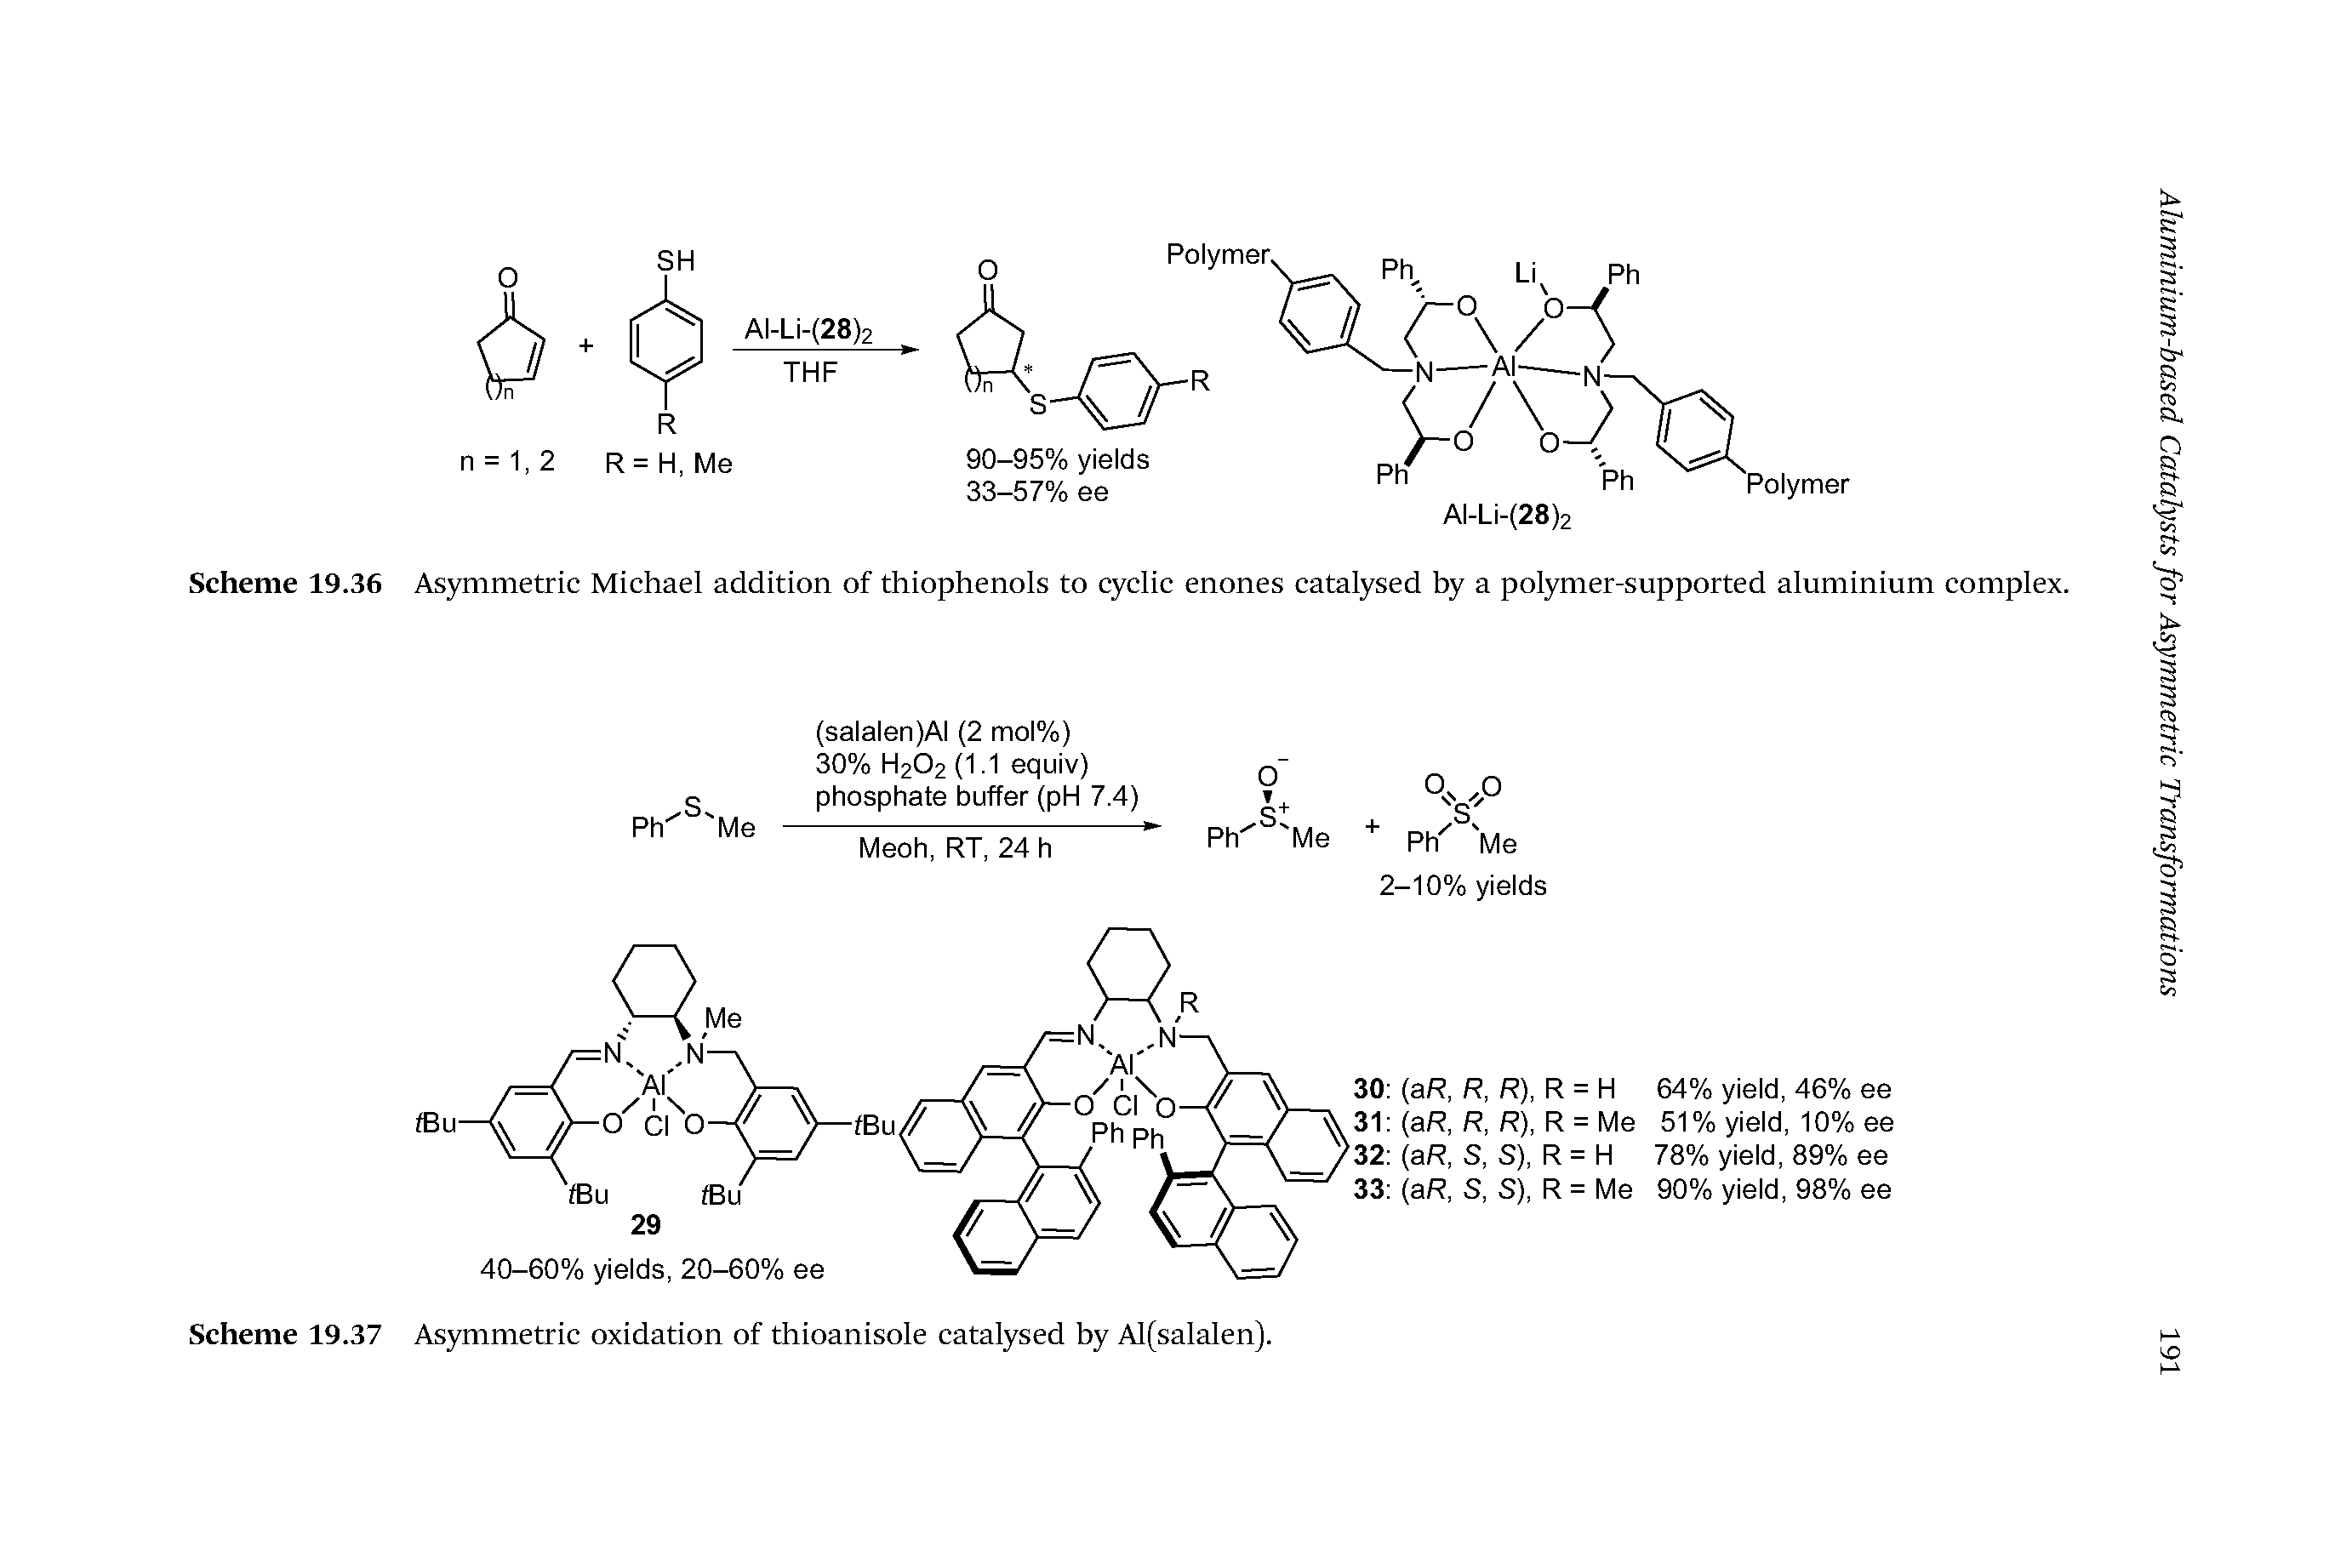 Scheme 19.36 Asymmetric Michael addition of thiophenols to cyclic enones catalysed by a polymer-supported aluminium complex.